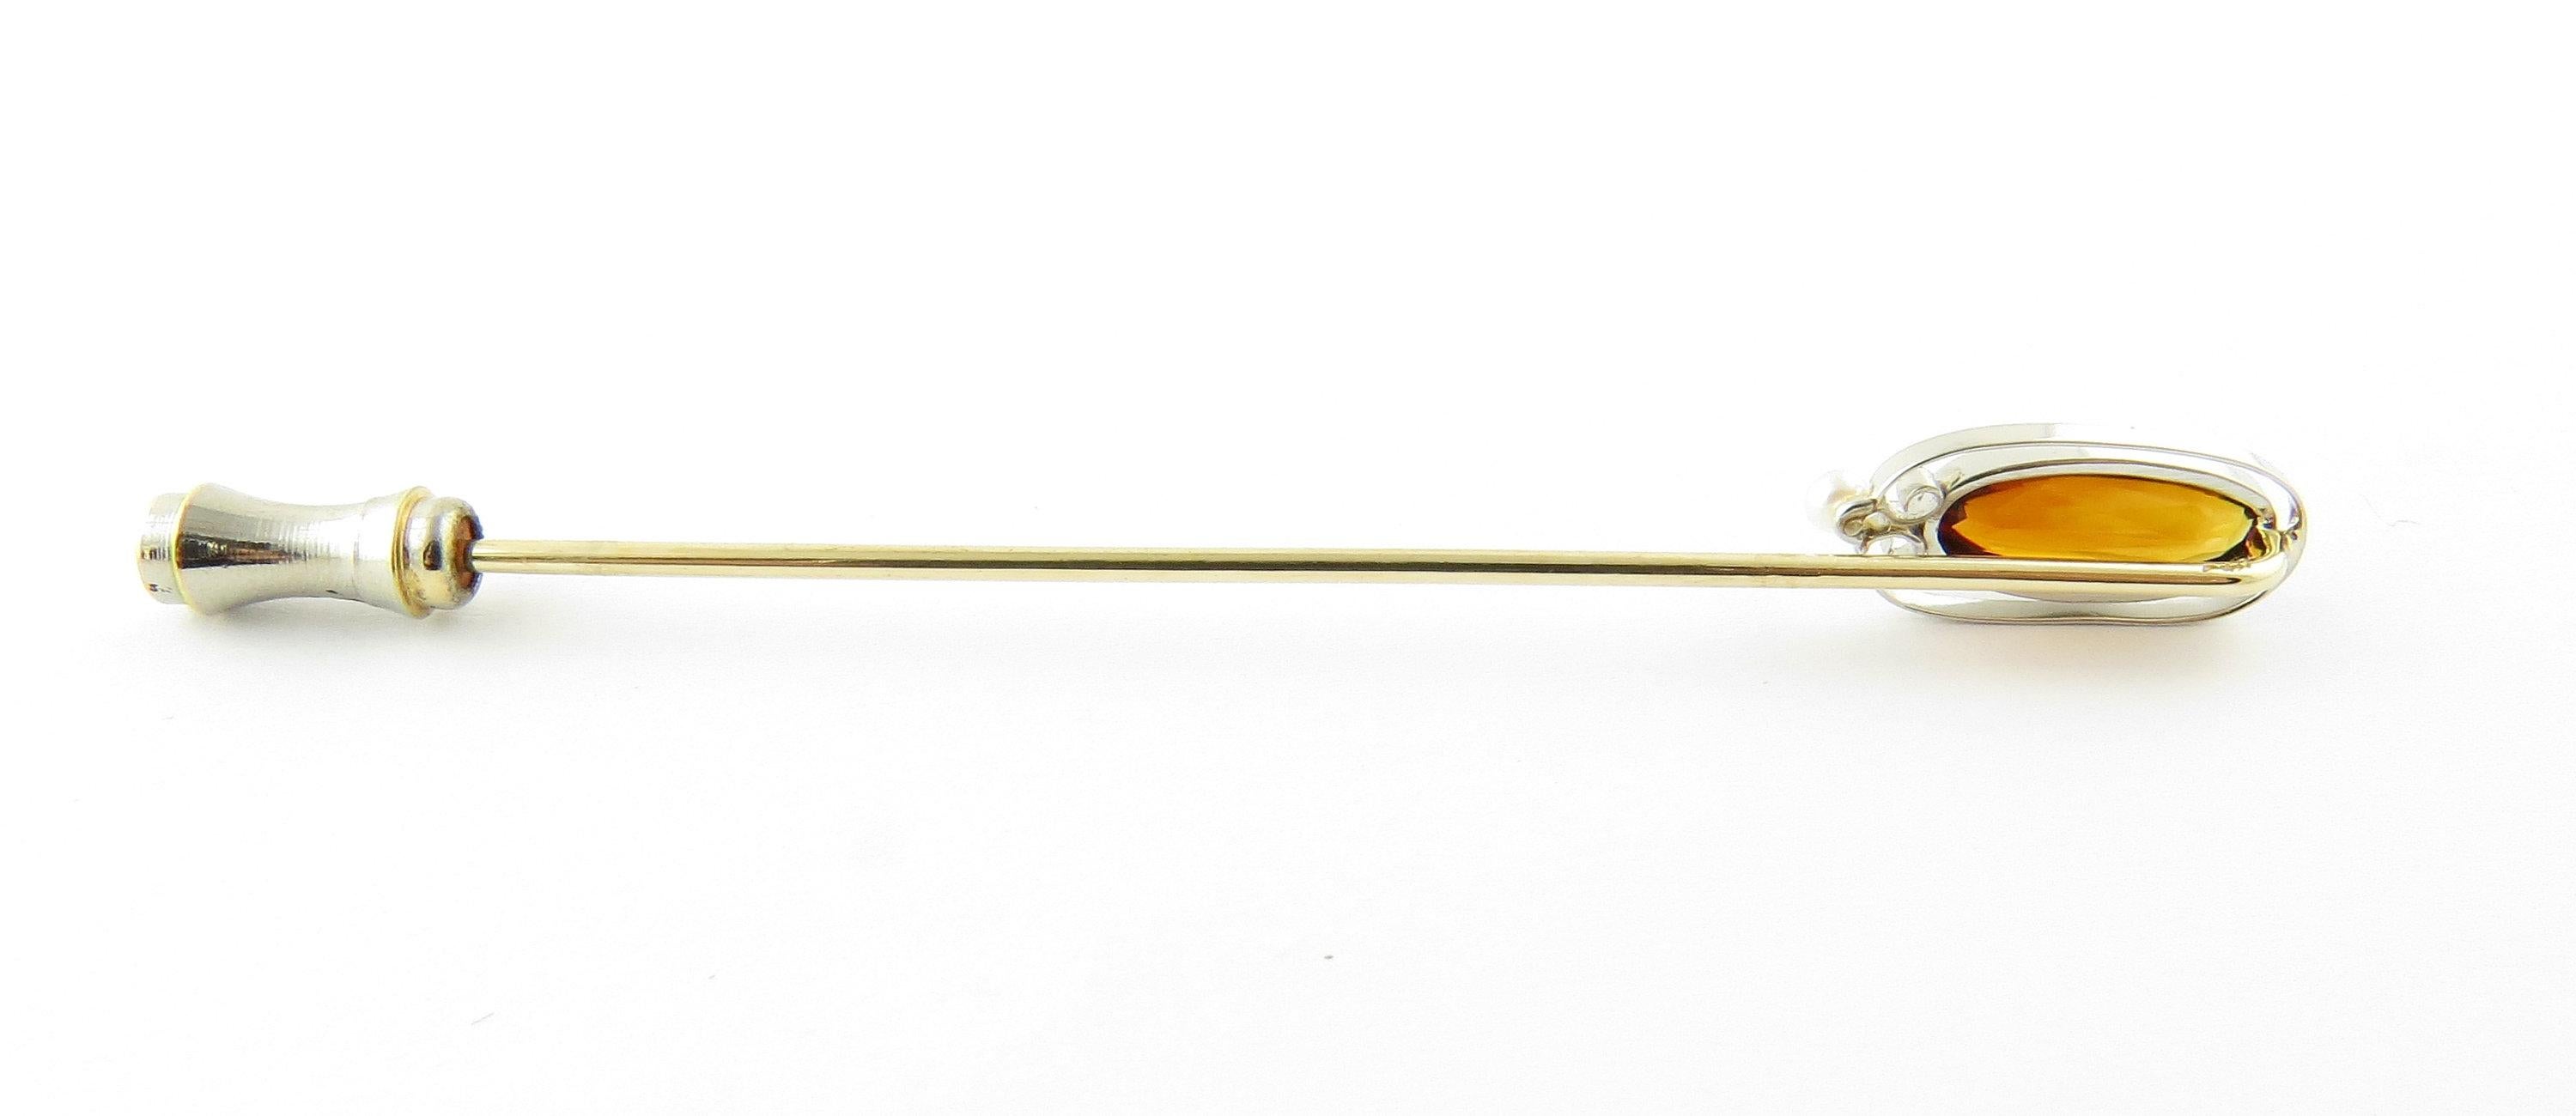 Vintage 14 Karat White Gold Amber and Seed Pearl Stick Pin- This elegant stick pin features one oval amber gemstone (12 mm x 6 mm) accented with one seed pearl and set in beautifully detailed 14K white gold. Size: 3 inches Weight: 1.9 dwt. / 3.1 gr.